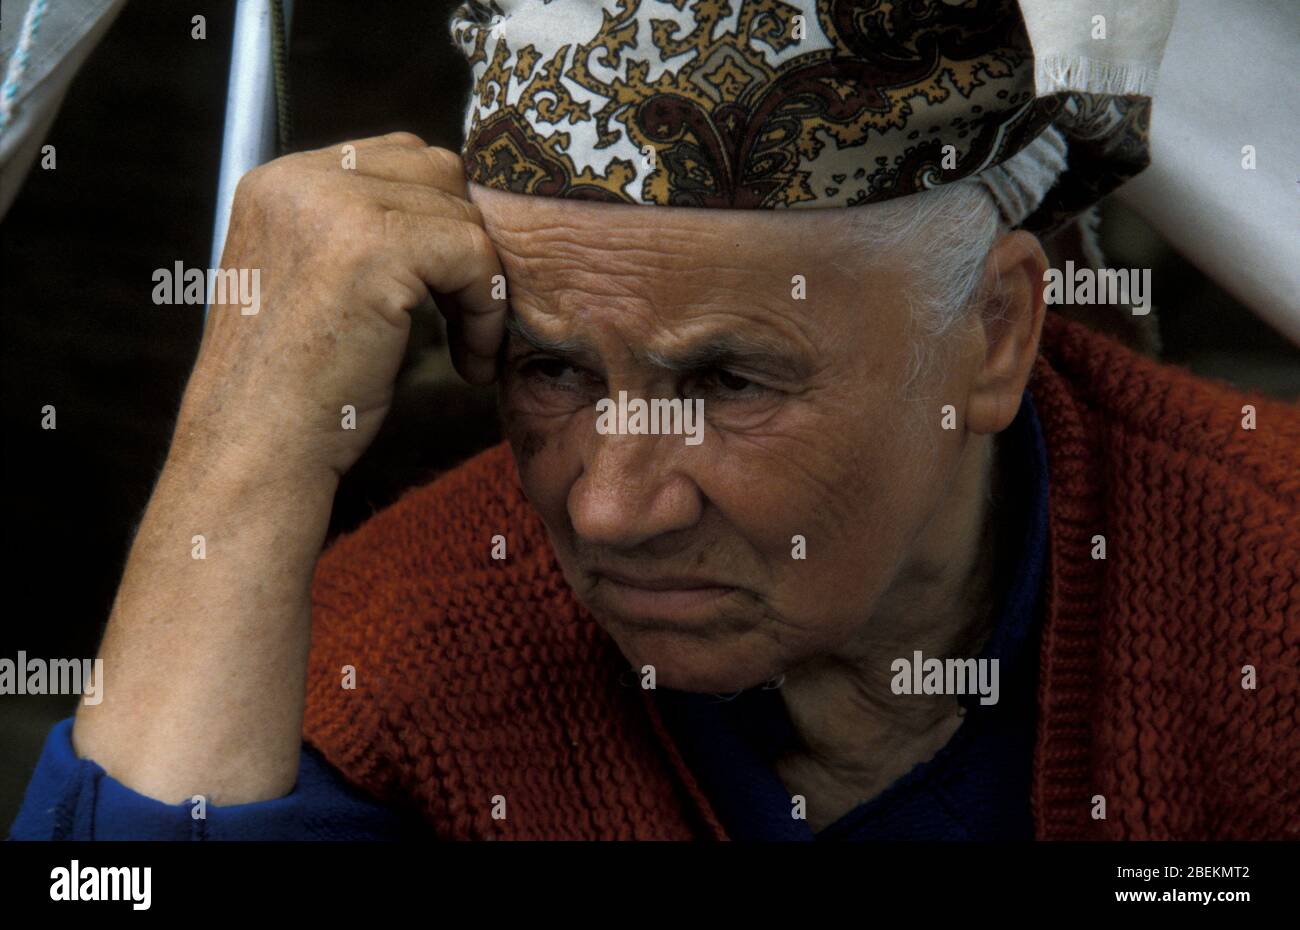 1995 - Traumatised elderly female refugee from Srebrenica at the Tuzla airfield temporary refugee camp for Bosnian Muslims fleeing the Srebrenica Massacre during the Bosnian war Stock Photo